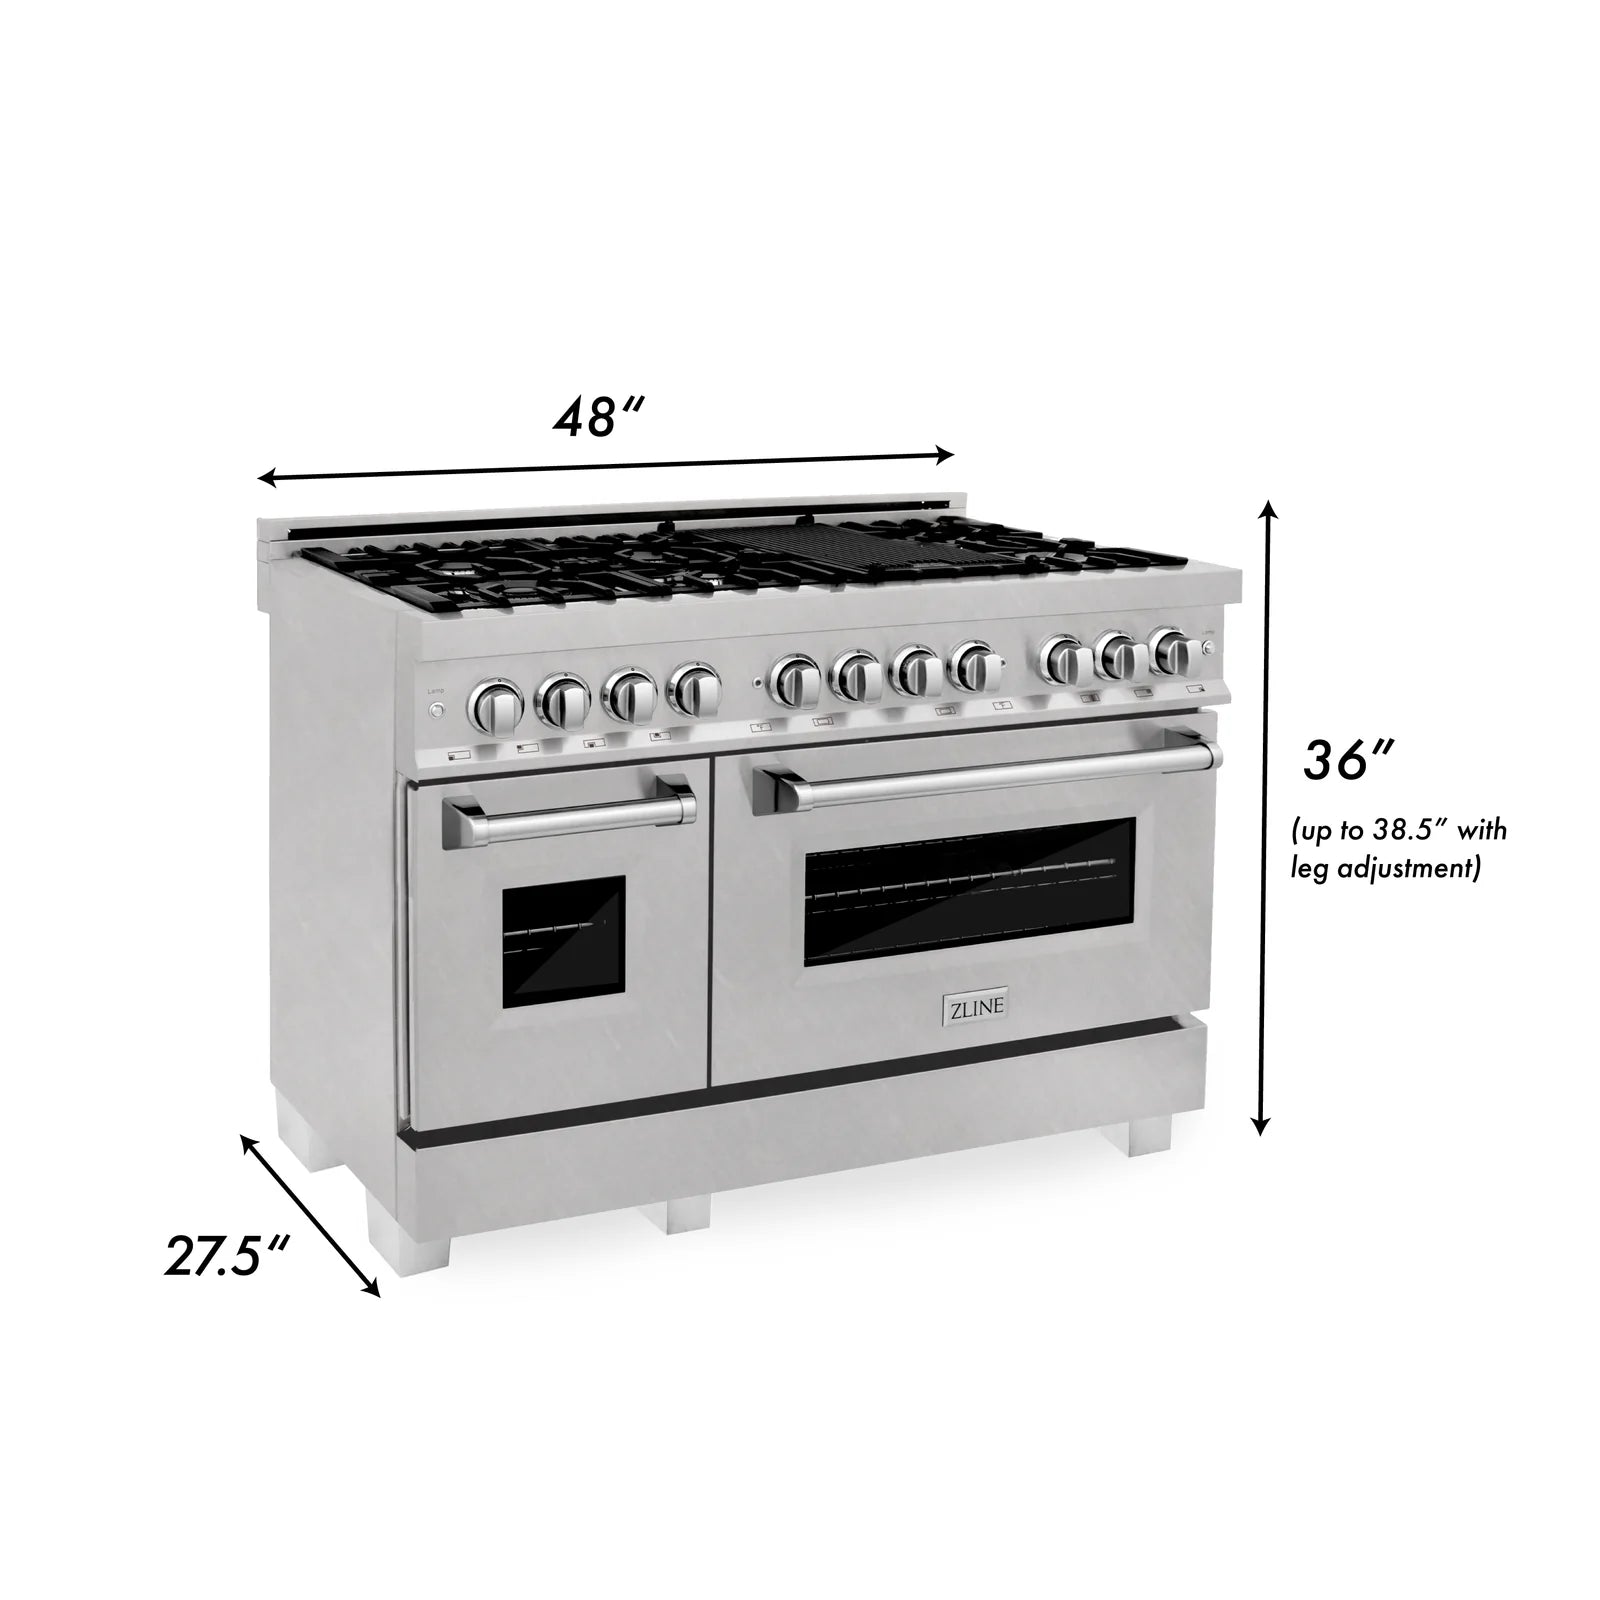 ZLINE 48-Inch 6.0 cu. ft. Electric Oven and Gas Cooktop Dual Fuel Range with Griddle in Fingerprint Resistant Stainless - RAS-SN-GR-48